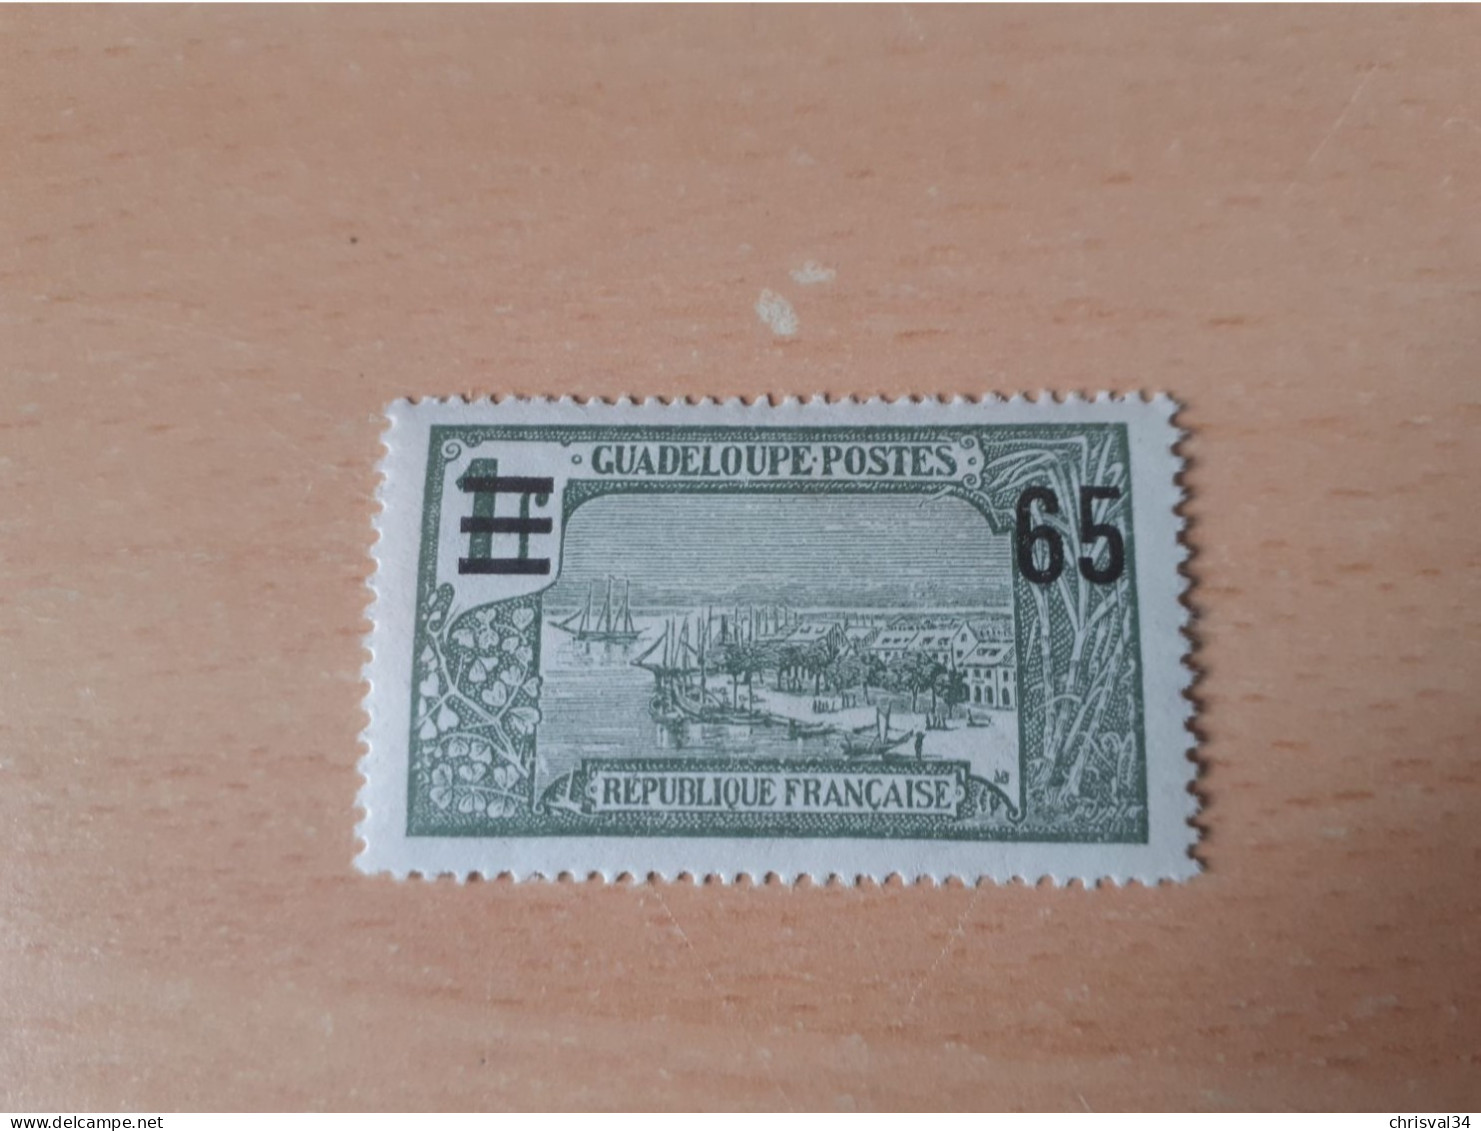 TIMBRE   GUADELOUPE       N  90     COTE  2,50   EUROS  NEUF  SANS  CHARNIERE - Unused Stamps